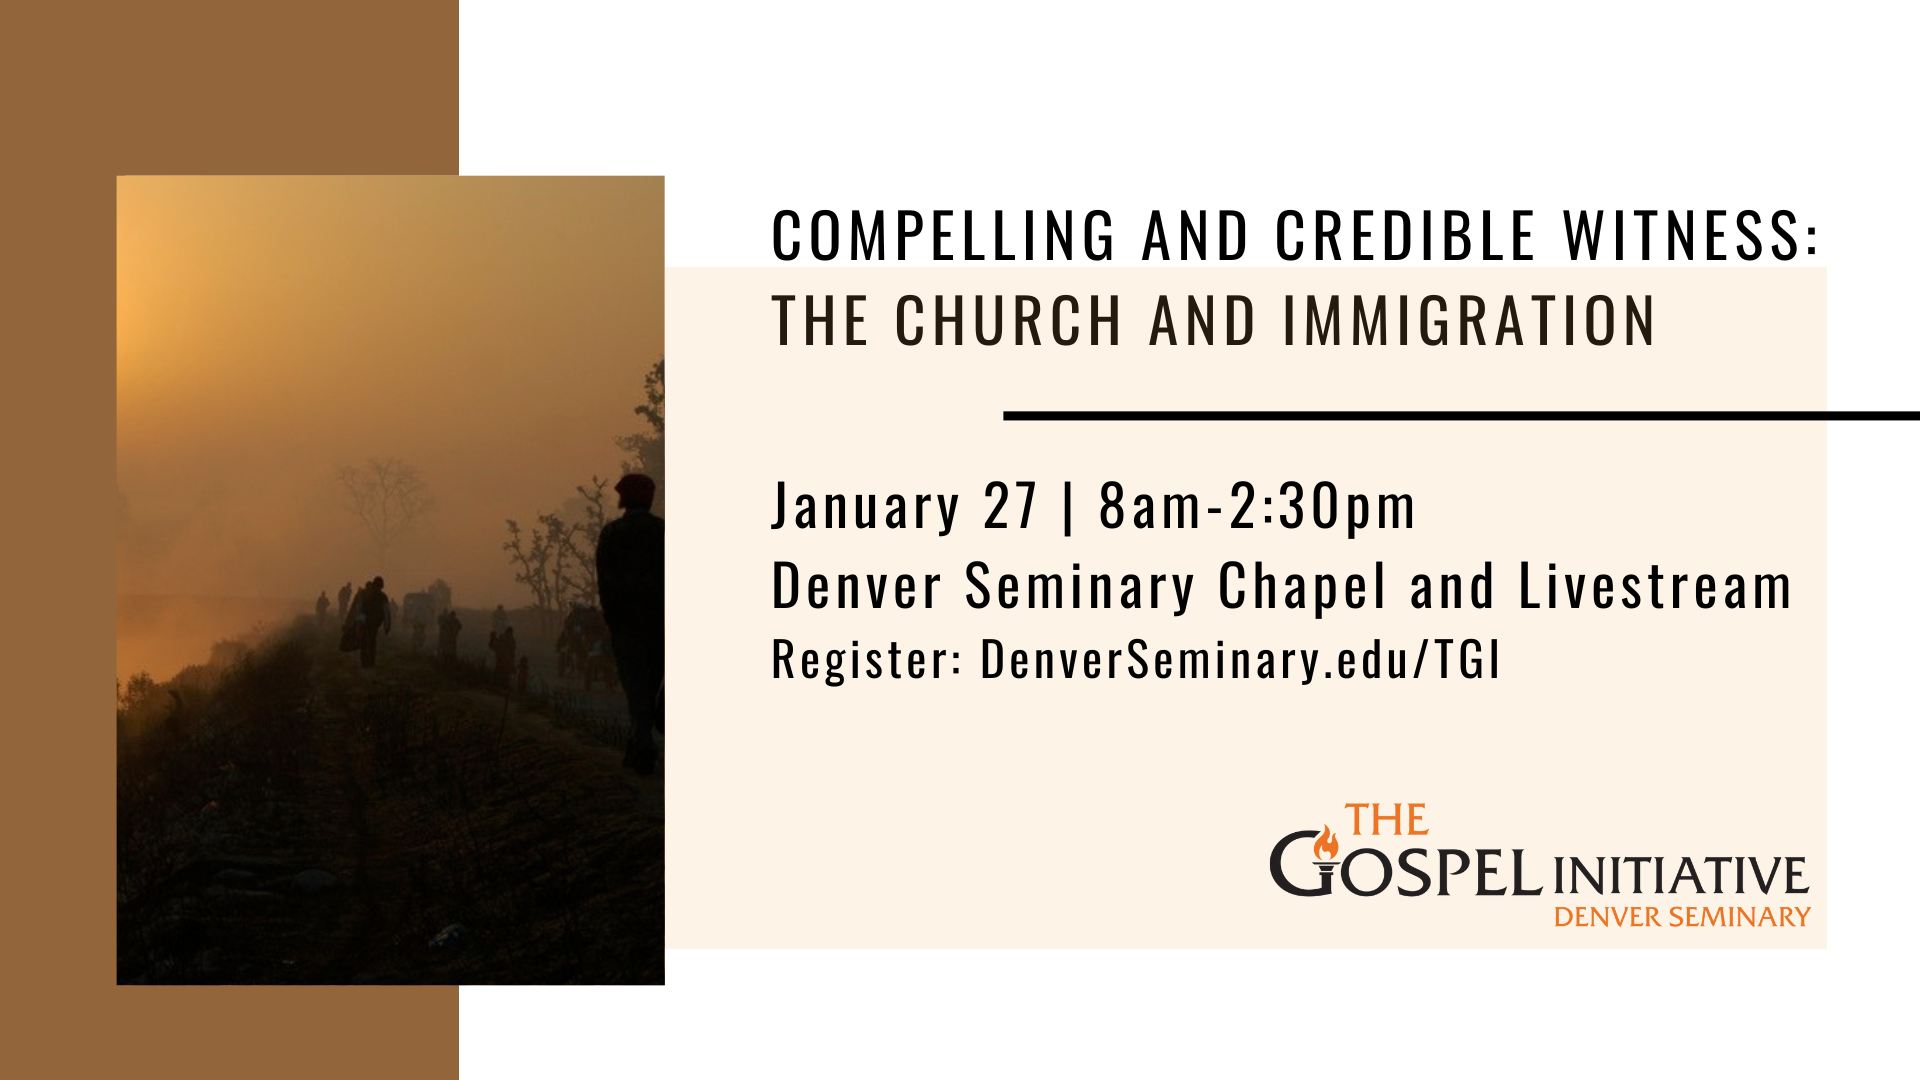 Compelling and Credible Witness conference announcement courtesy of The Gospel Initiative Denver Seminary.